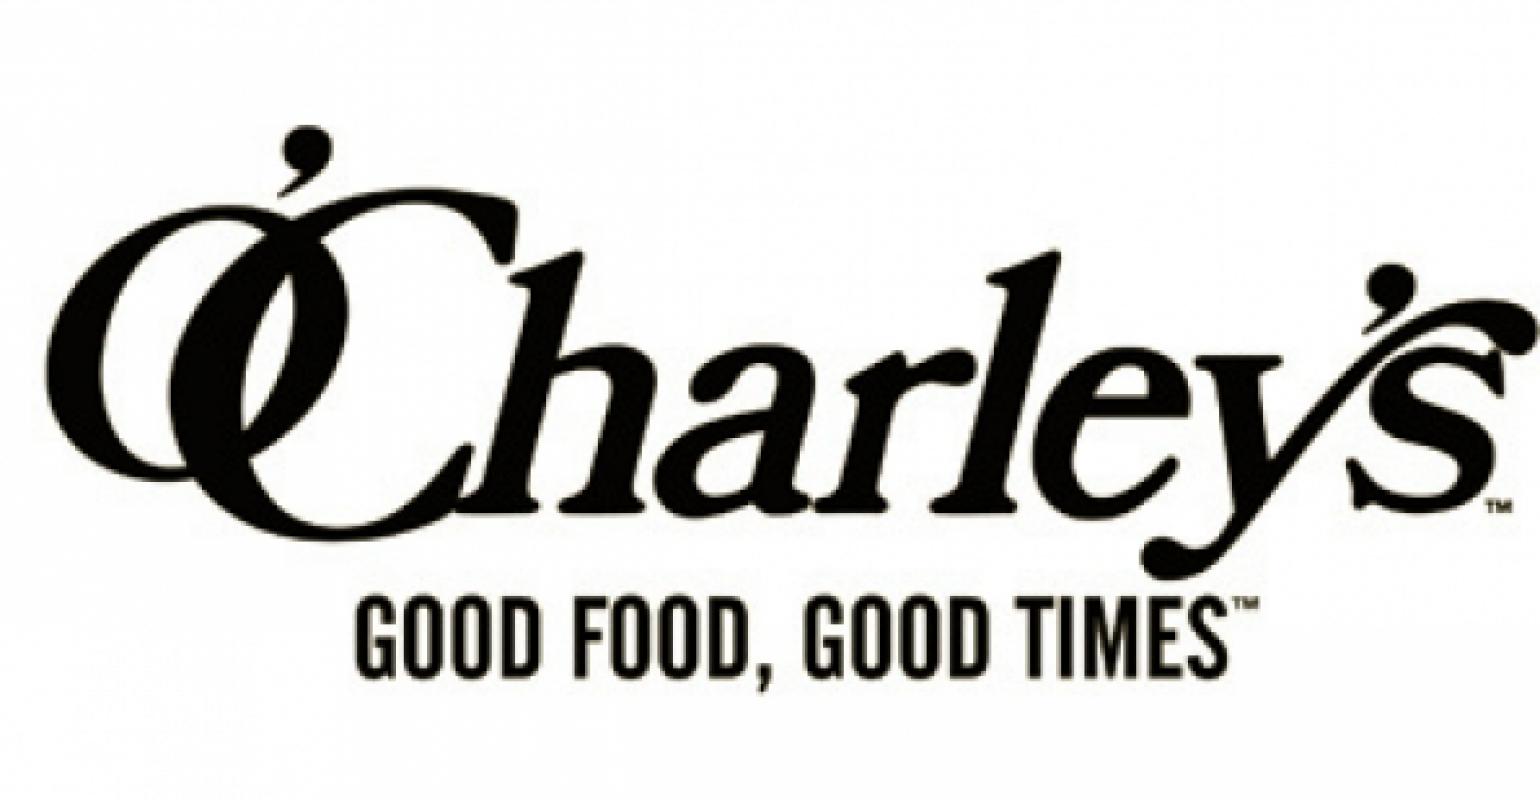 O'Charley's closes 14 underperforming locations | Nation's Restaurant News